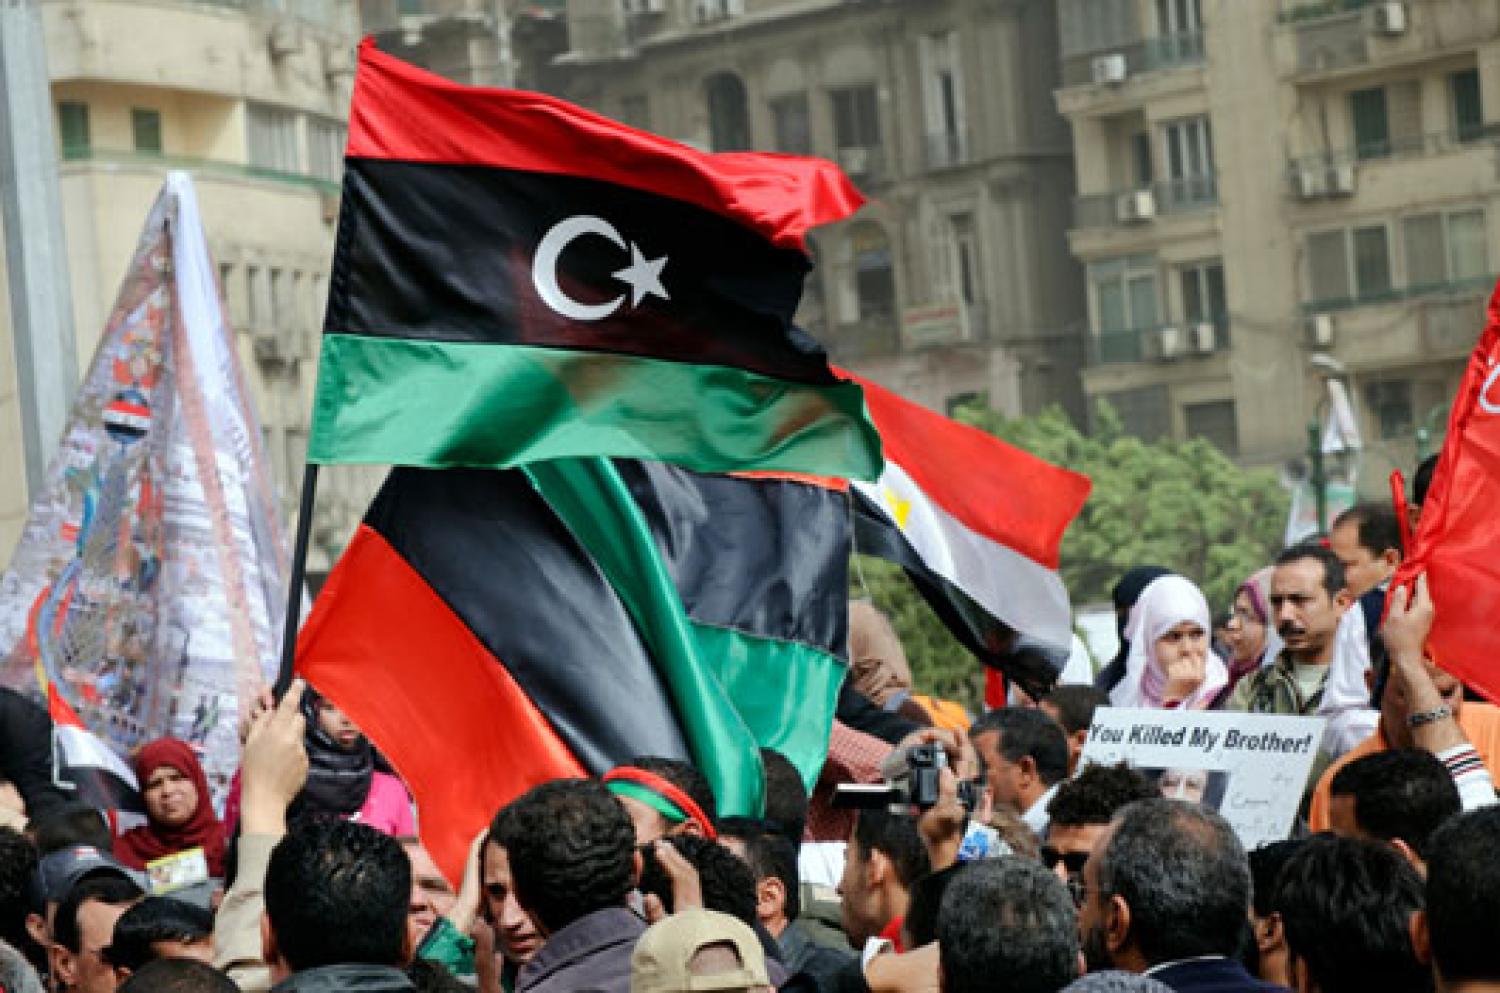 Protester gather at an anti-Qaddafi demonstration in Cairo, Egypt.